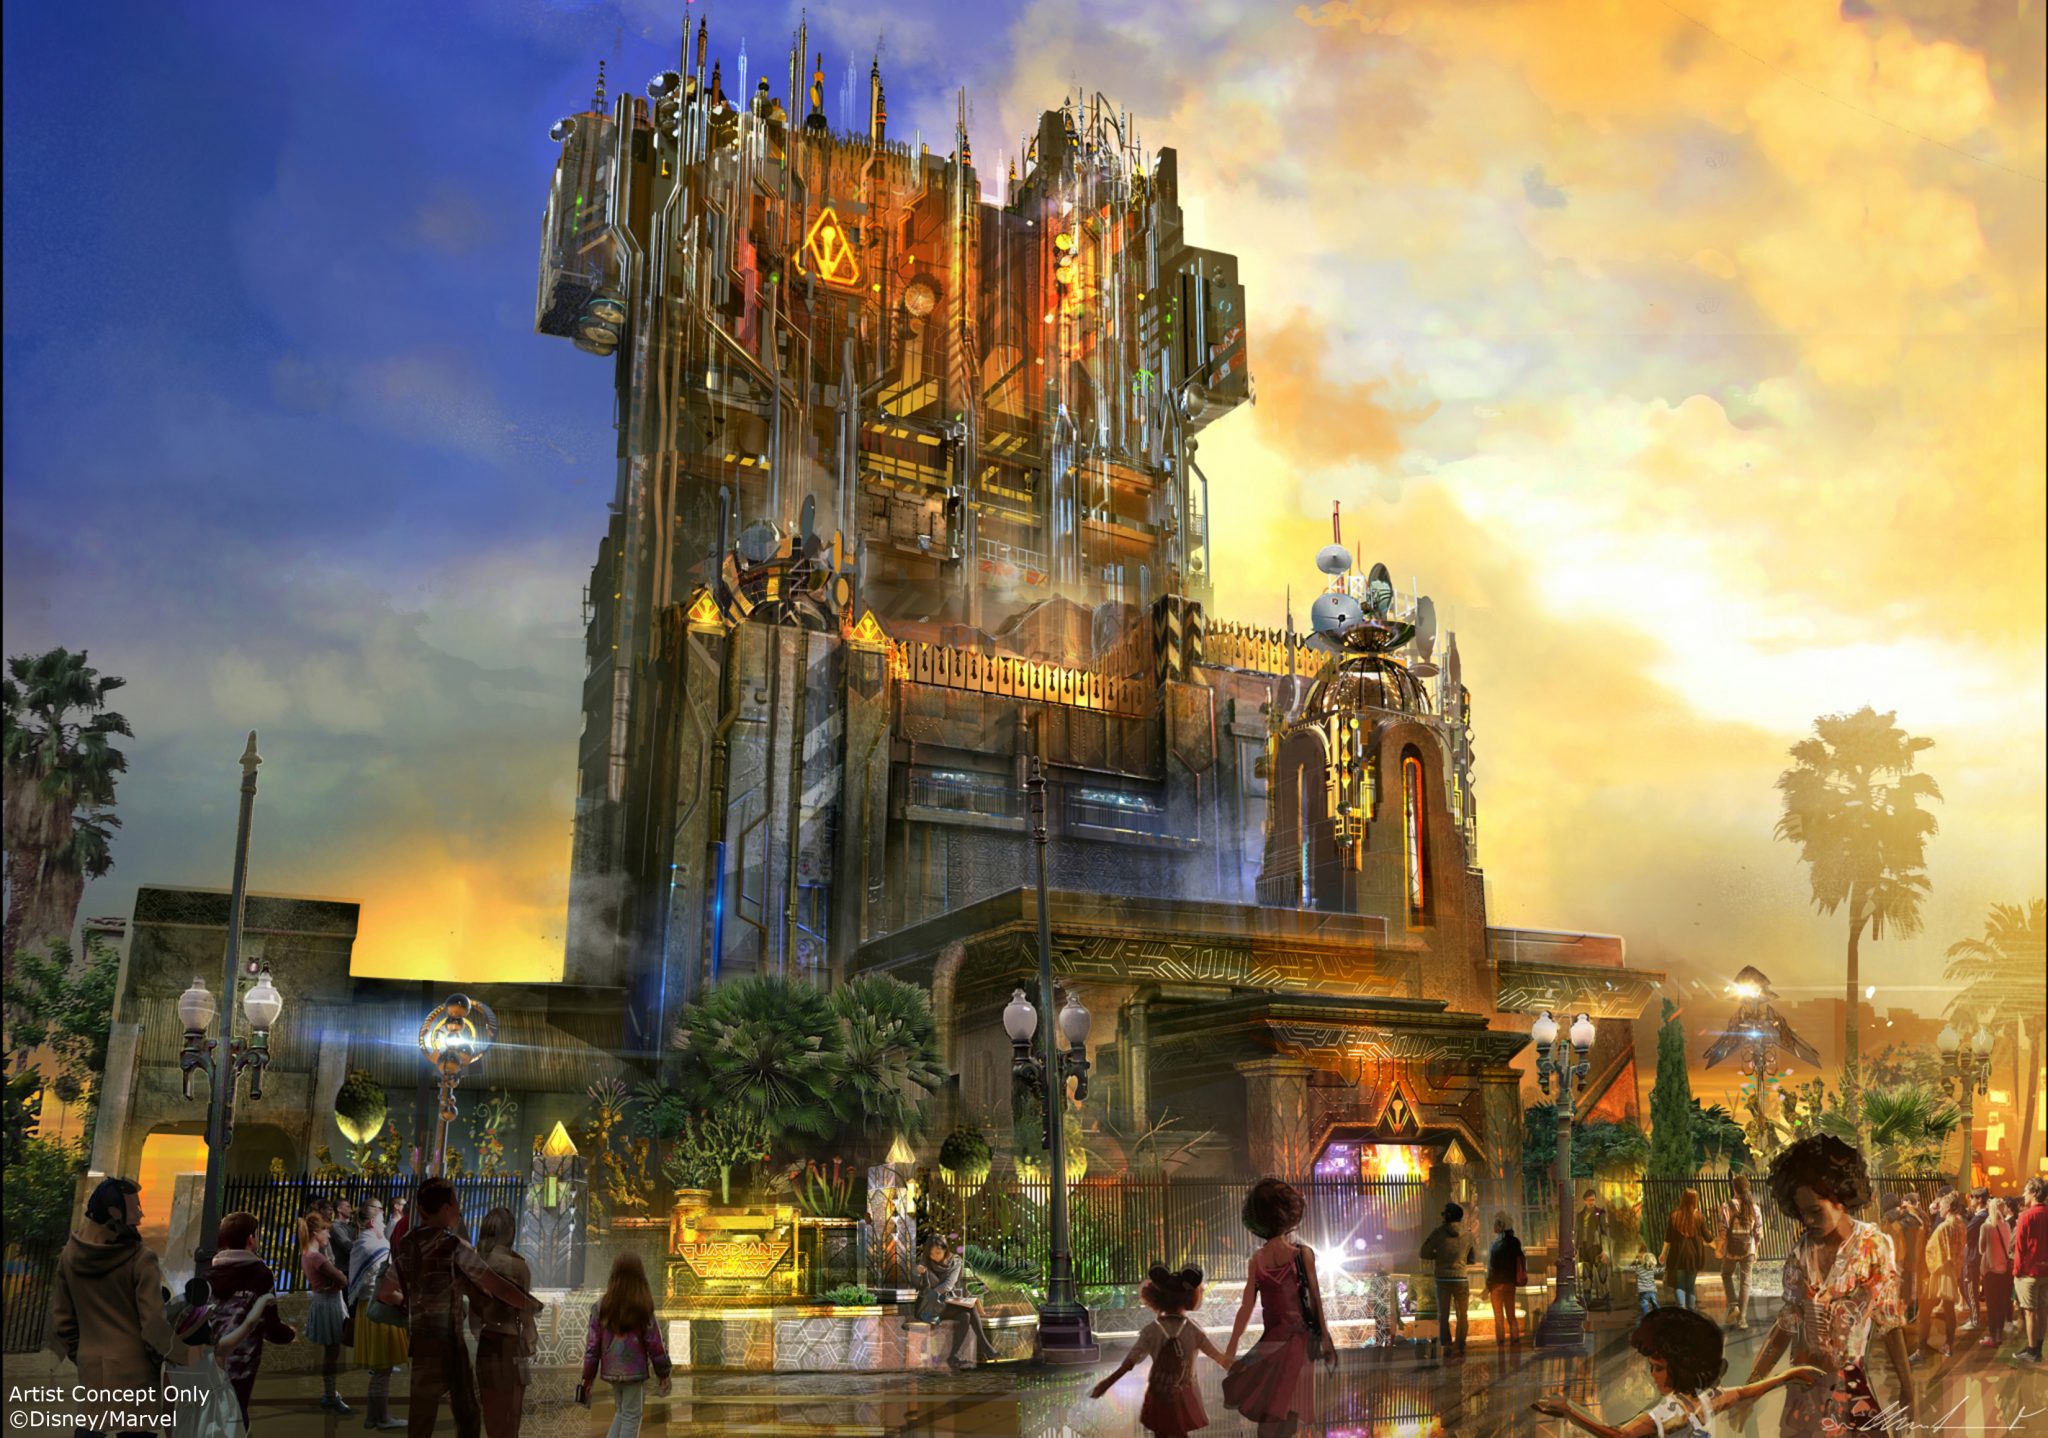 Guardians of the Galaxy – Mission: BREAKOUT! Coming to Disney California Adventure in 2017